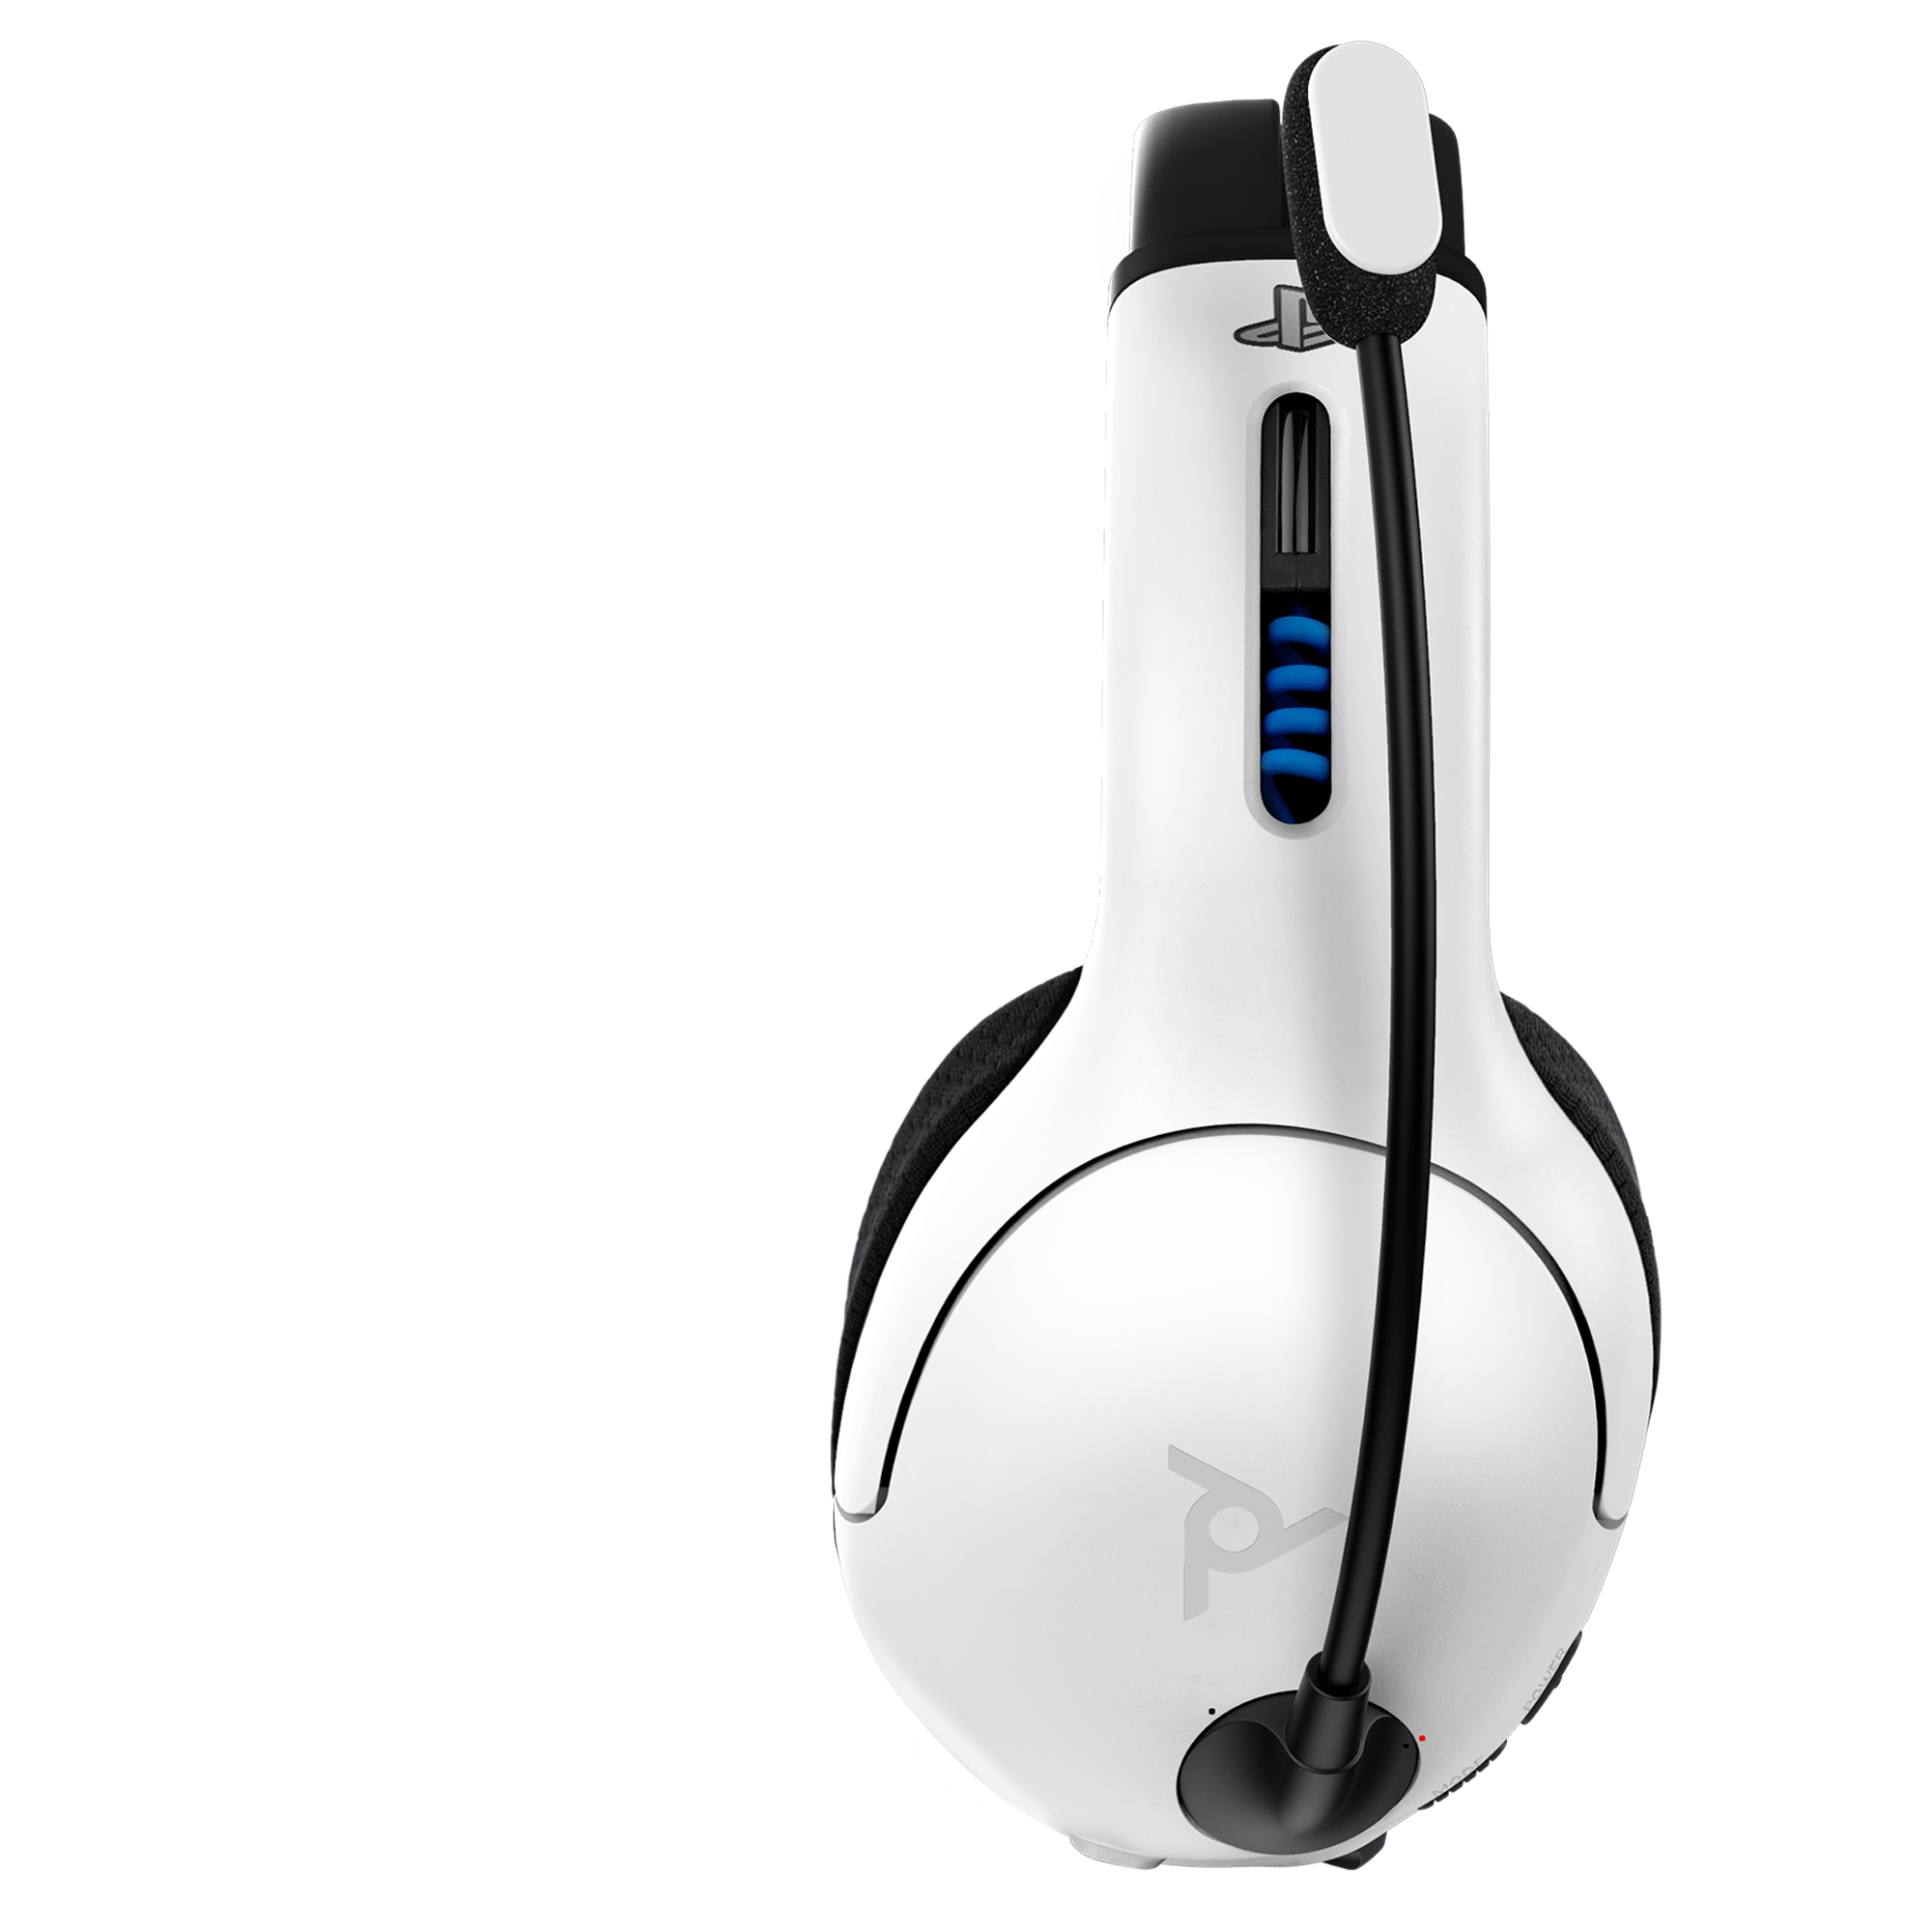 pdp gaming lvl40 wired headset